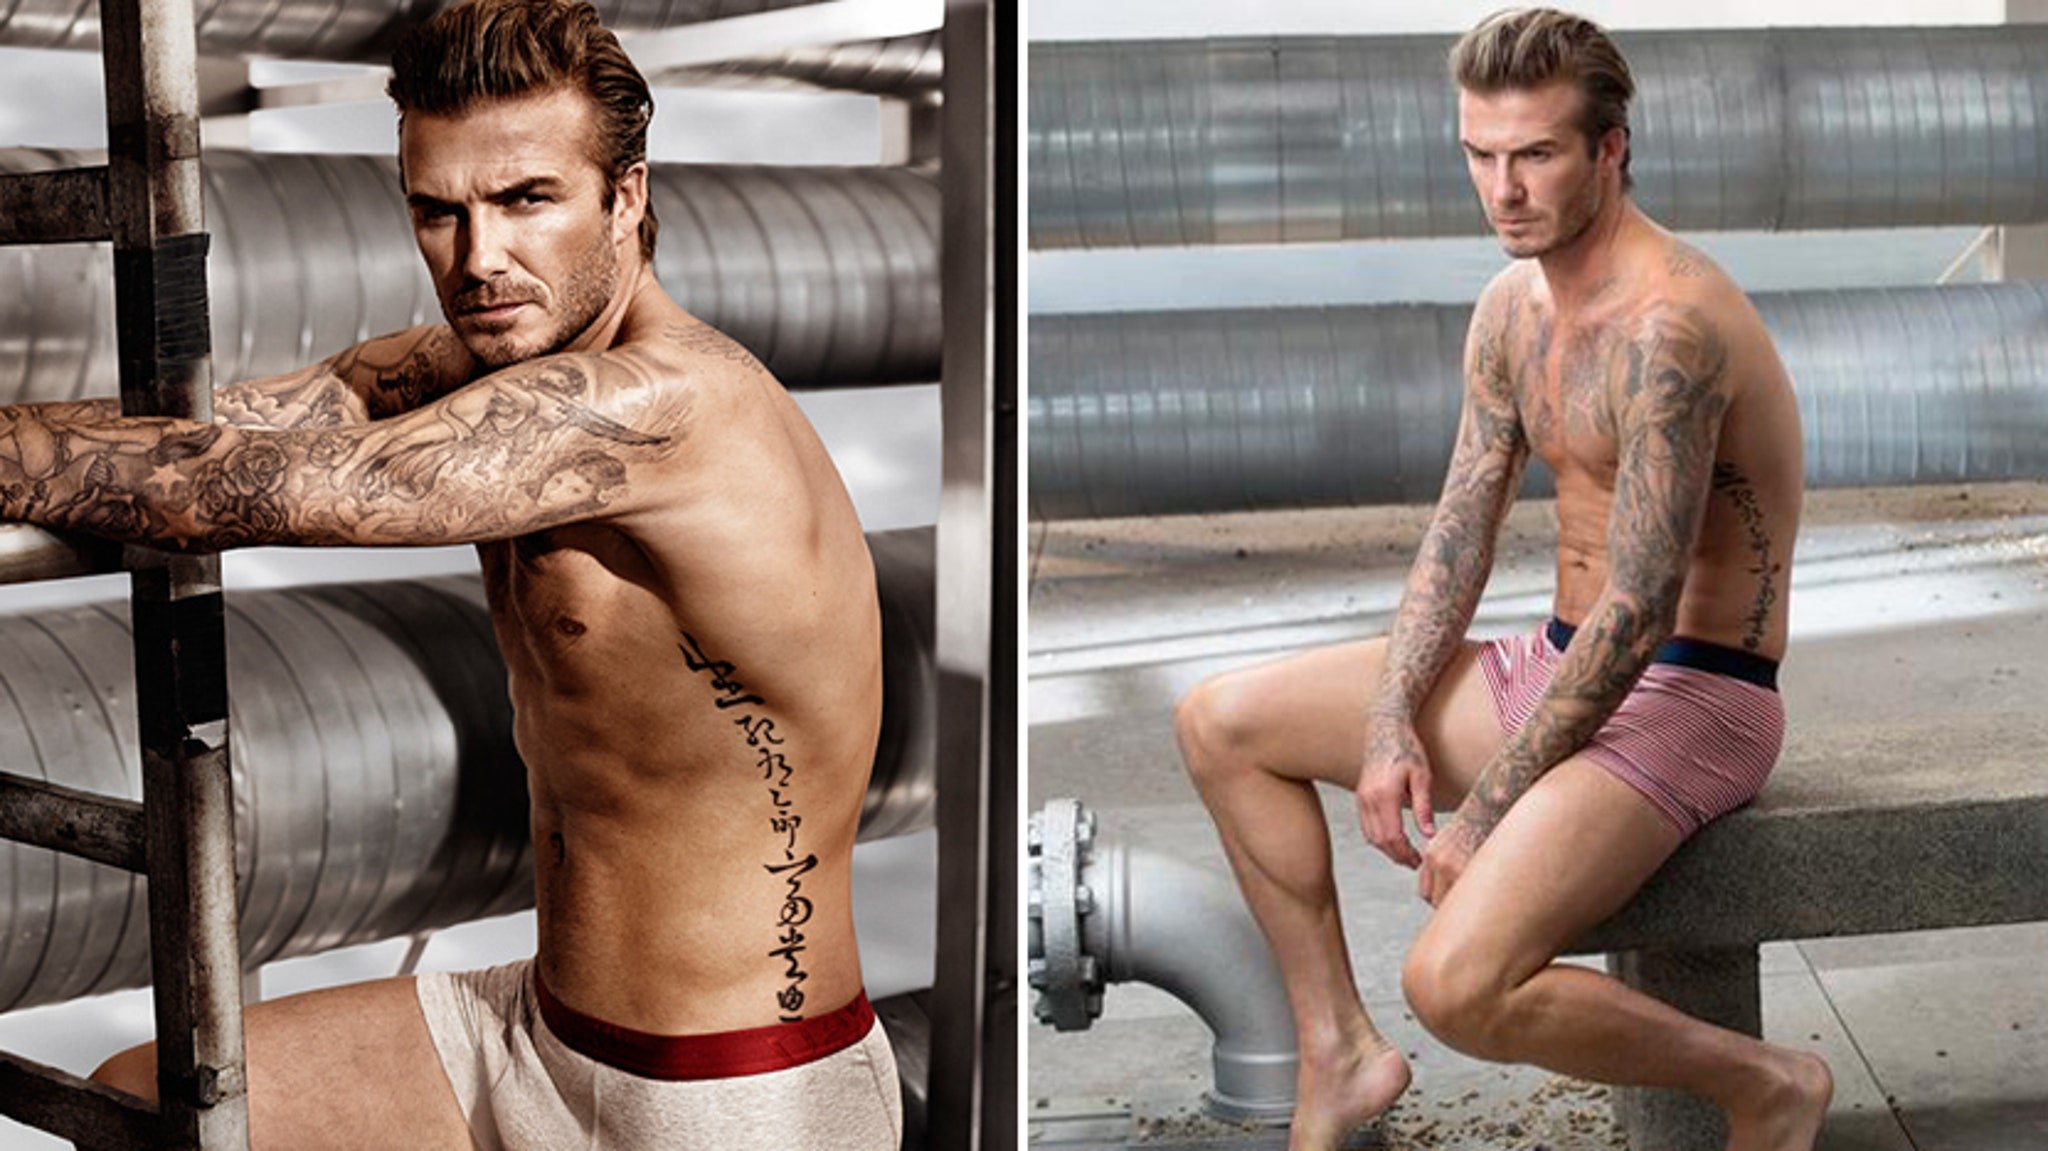 chase hain recommends David Beckham Nude Photos